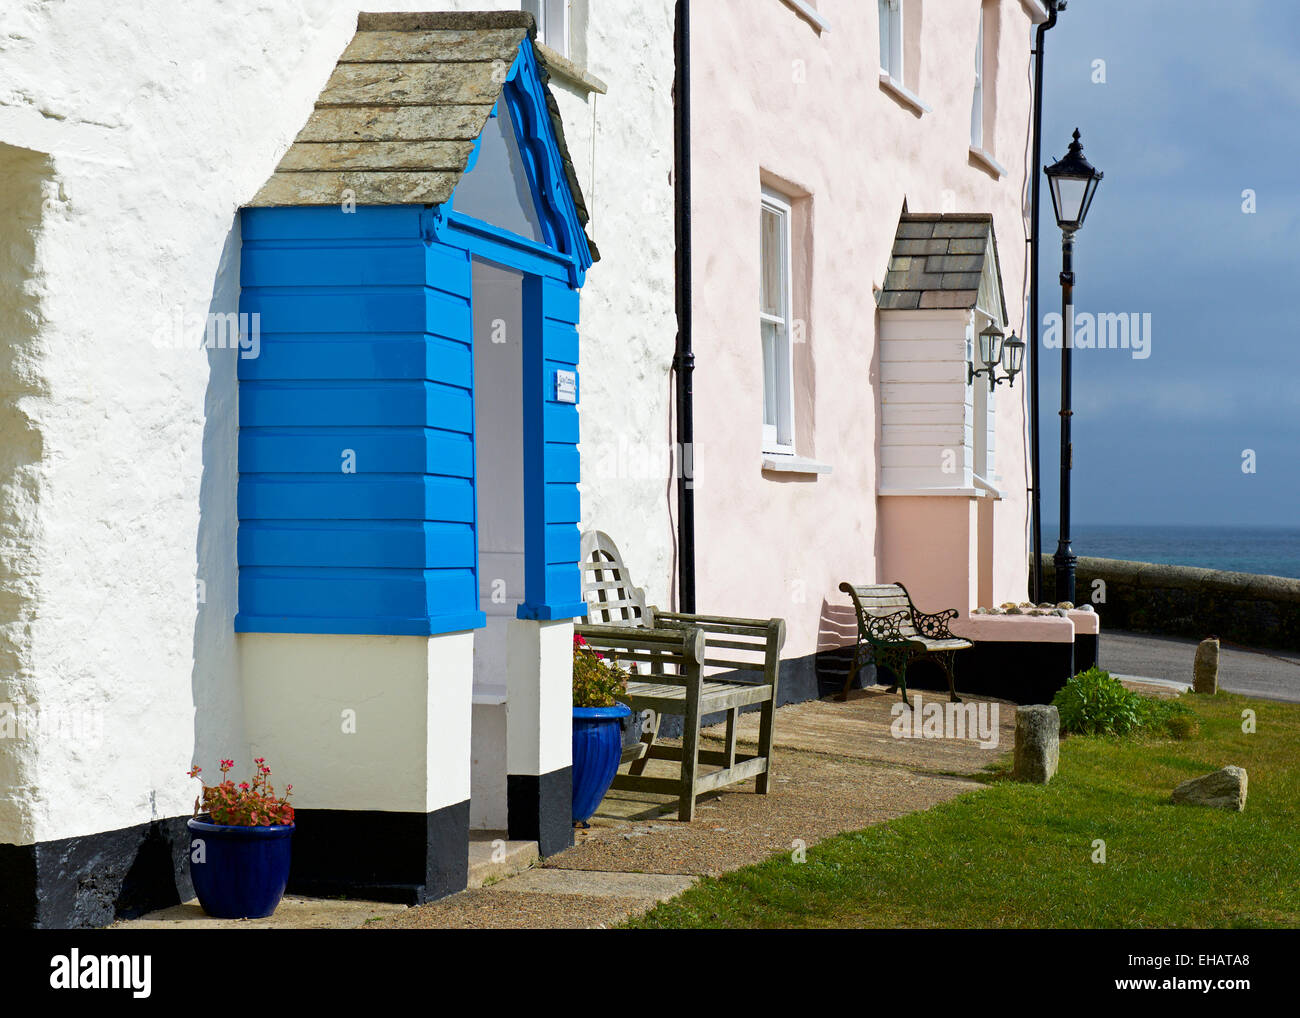 Cottages at Charlestown, Cornwall, England UK Stock Photo